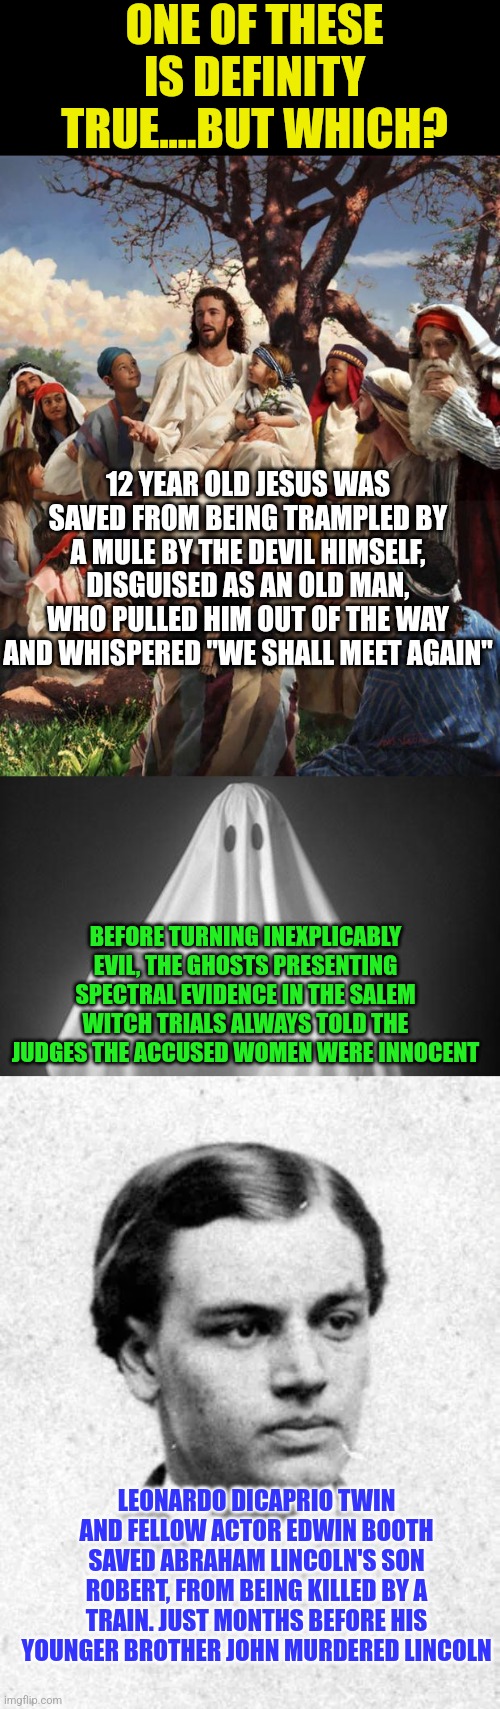 Truth is stranger than fiction. Want proof? | ONE OF THESE IS DEFINITY TRUE....BUT WHICH? 12 YEAR OLD JESUS WAS SAVED FROM BEING TRAMPLED BY A MULE BY THE DEVIL HIMSELF, DISGUISED AS AN OLD MAN, WHO PULLED HIM OUT OF THE WAY AND WHISPERED "WE SHALL MEET AGAIN"; BEFORE TURNING INEXPLICABLY EVIL, THE GHOSTS PRESENTING SPECTRAL EVIDENCE IN THE SALEM WITCH TRIALS ALWAYS TOLD THE JUDGES THE ACCUSED WOMEN WERE INNOCENT; LEONARDO DICAPRIO TWIN AND FELLOW ACTOR EDWIN BOOTH SAVED ABRAHAM LINCOLN'S SON ROBERT, FROM BEING KILLED BY A TRAIN. JUST MONTHS BEFORE HIS YOUNGER BROTHER JOHN MURDERED LINCOLN | image tagged in story time jesus,ghost,abe lincoln,history,facts,the truth | made w/ Imgflip meme maker